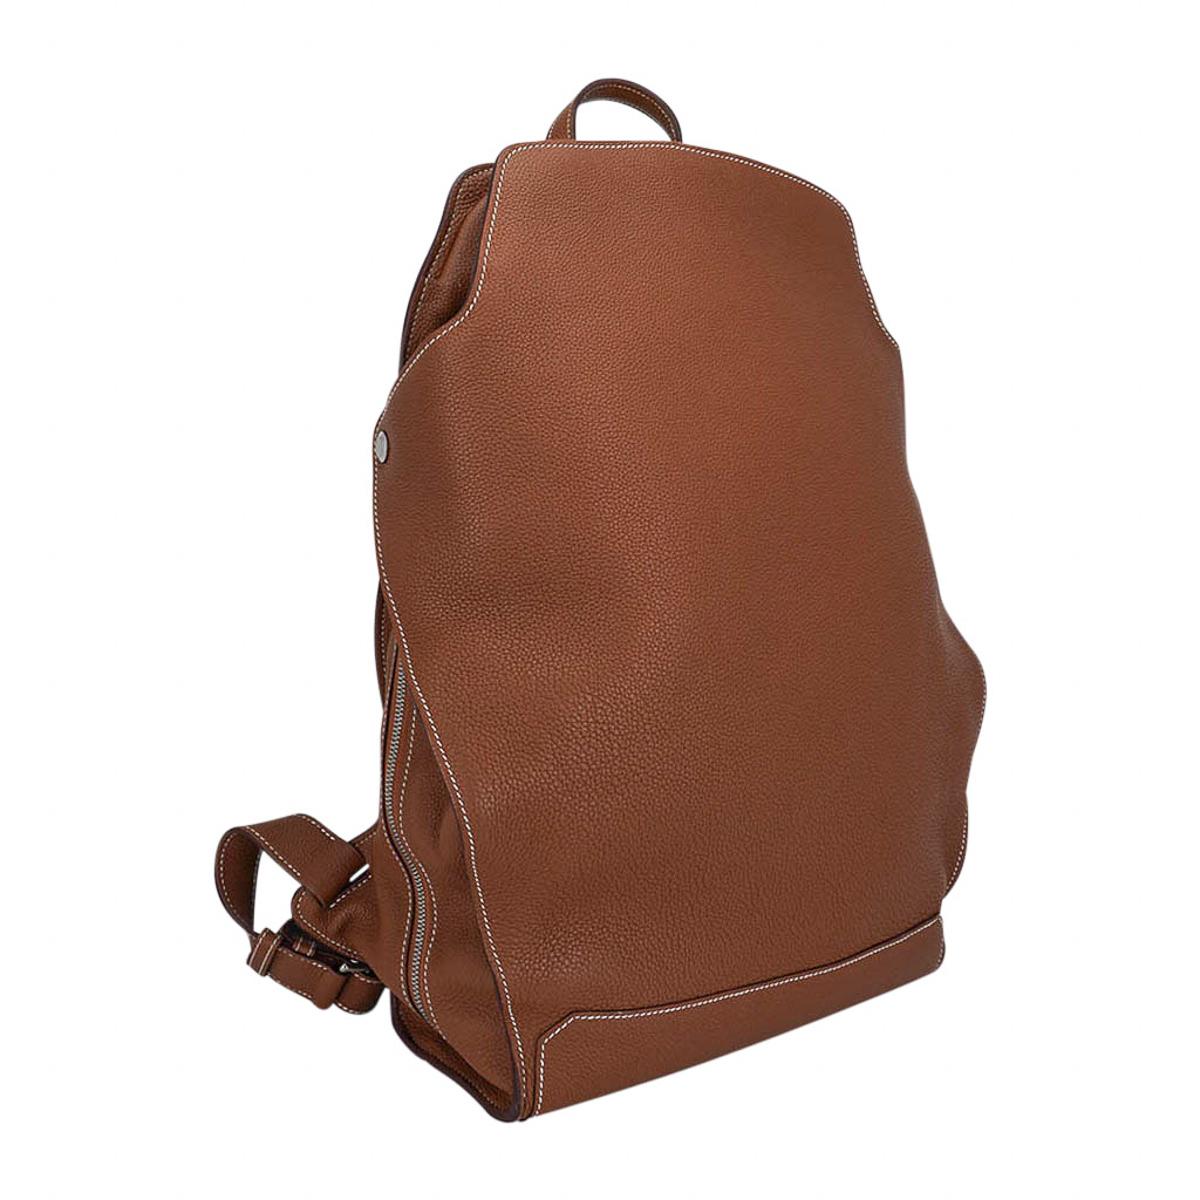 Guaranteed authentic Limited Edition Hermes 30 CityBack gentleman's Gold backpack.
Sleek and chic in Togo leather with Palladium hardware.
Beautifully shaped adjustable straps and top handle.
Side design detail with palladium snaps
Interior has slot